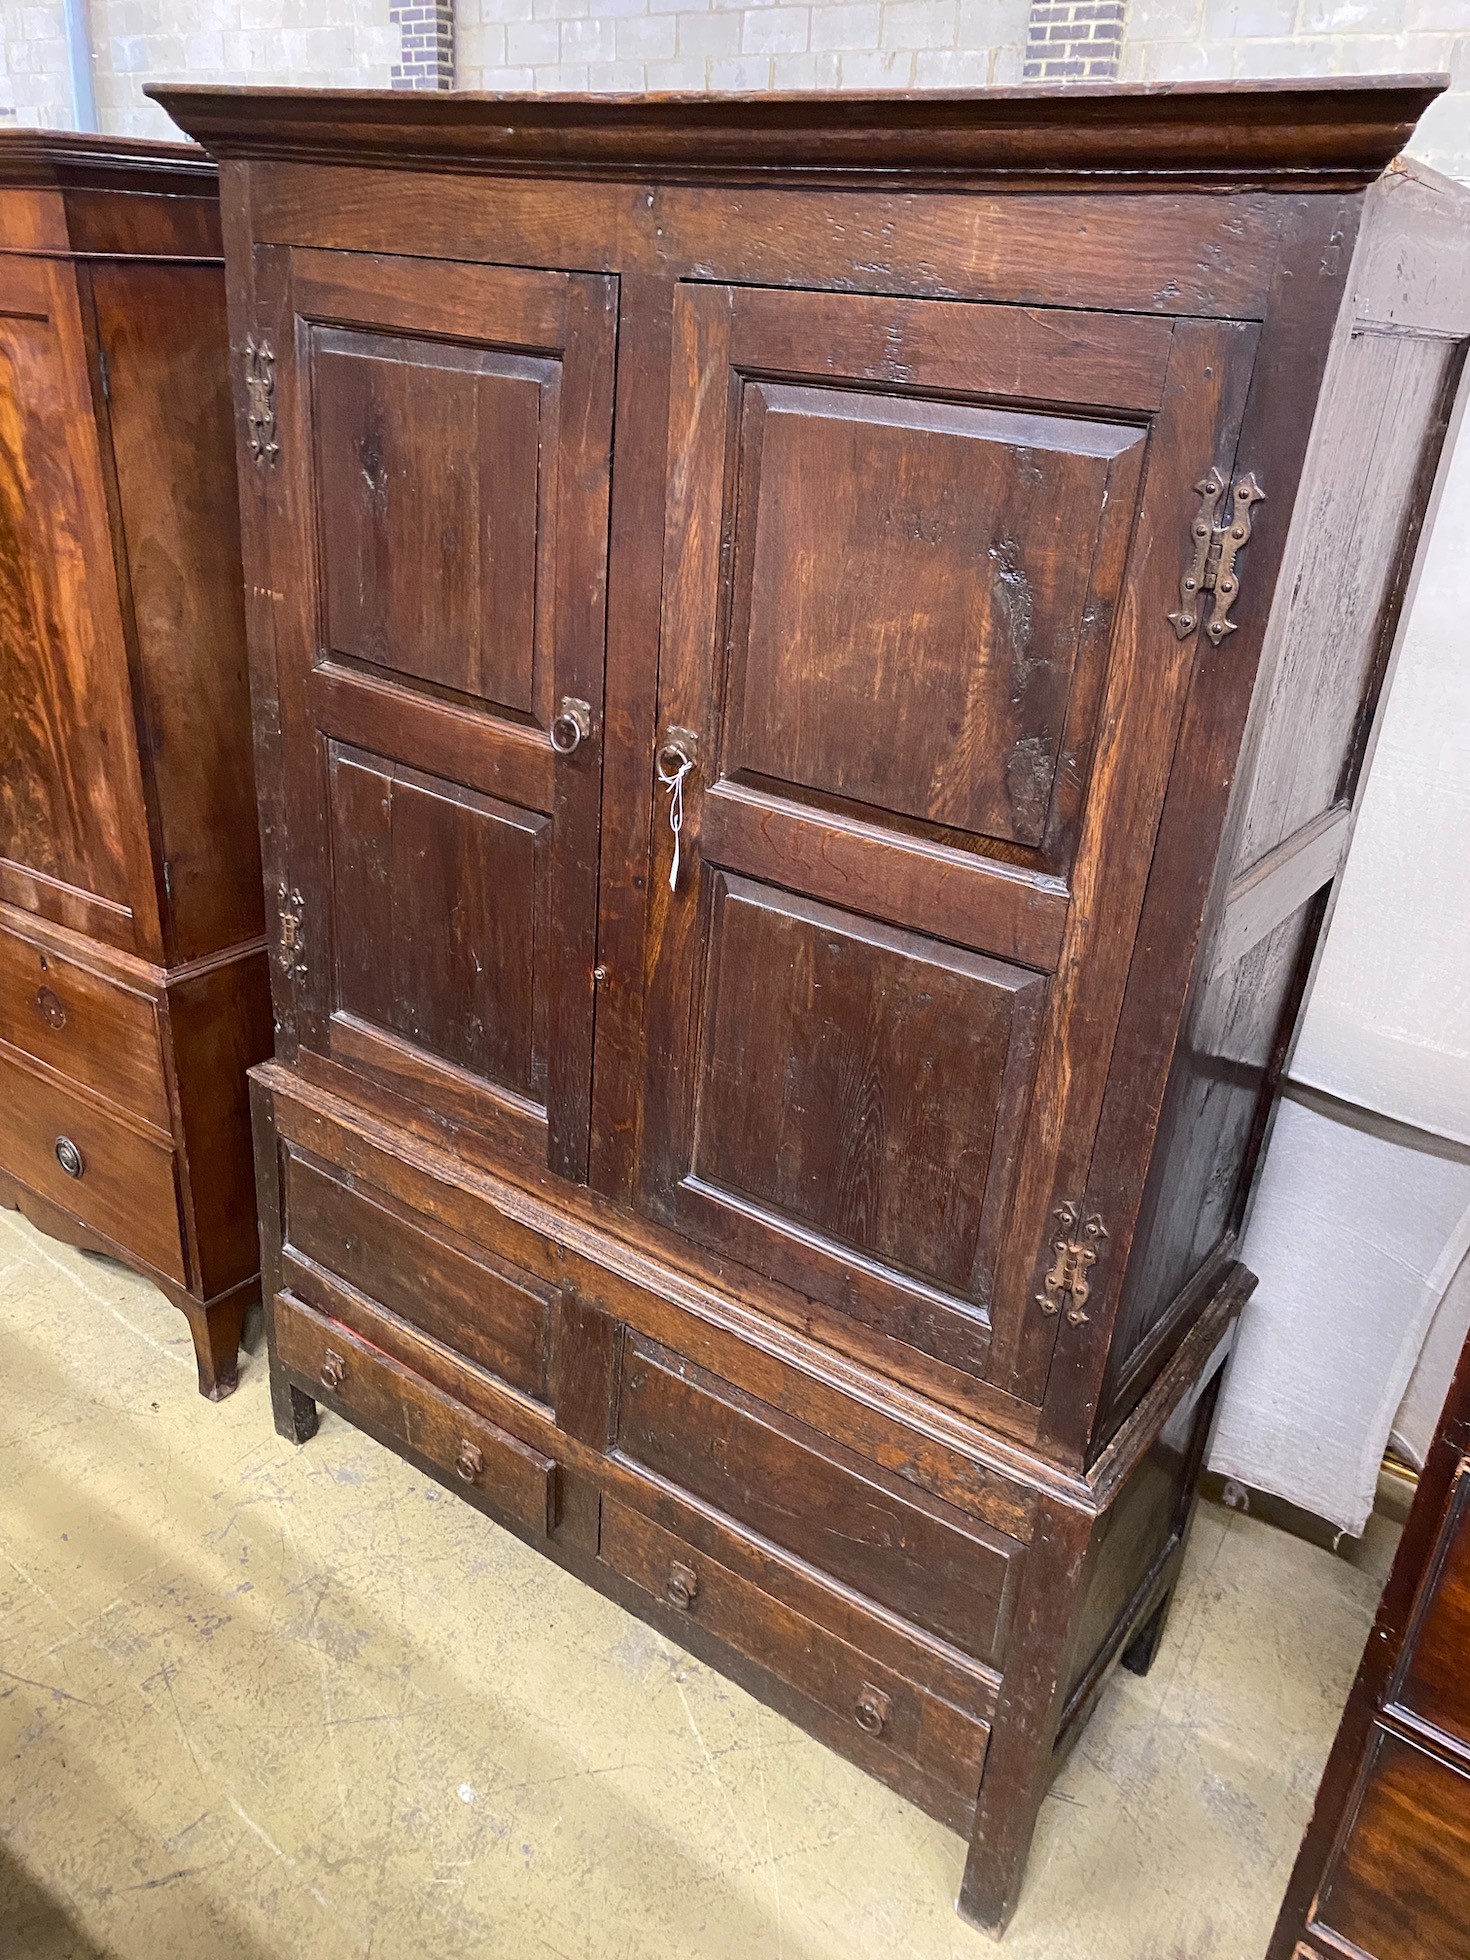 A mid 18th century oak press cupboard with two panelled doors and two drawers